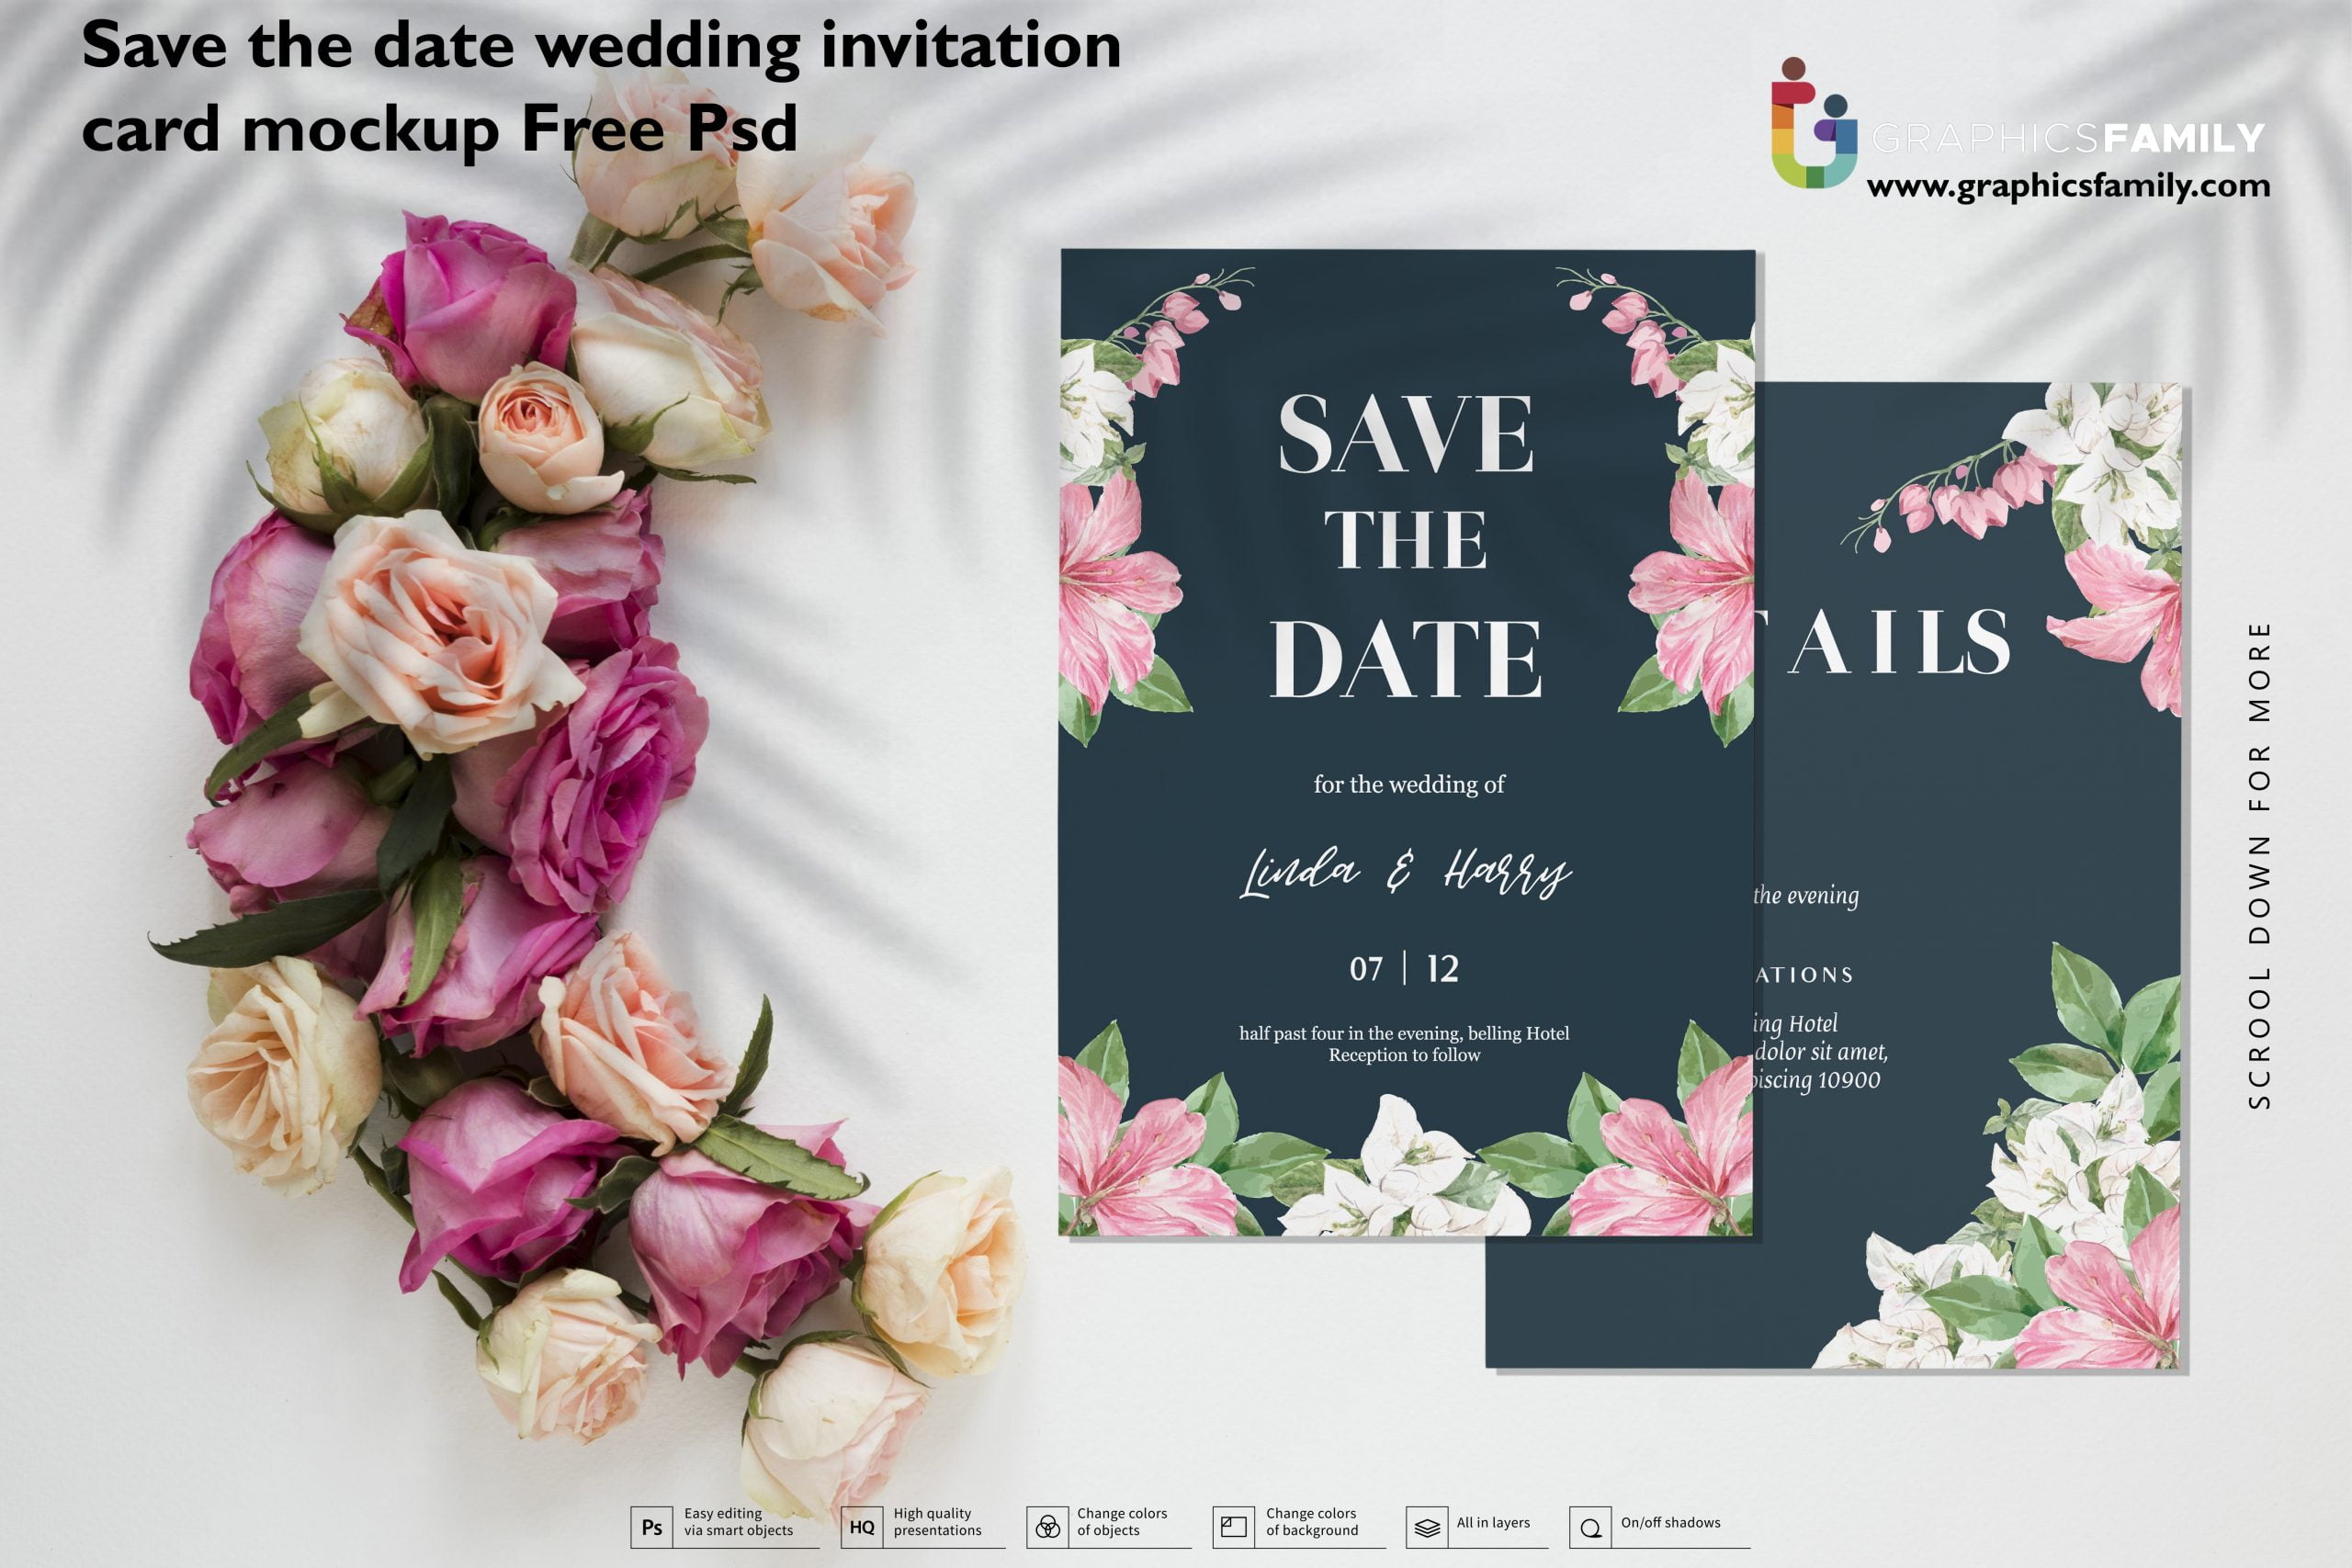 https://graphicsfamily.com/wp-content/uploads/edd/2021/01/Save-the-date-wedding-invitation-card-mockup-Free-PSD-scaled.jpg